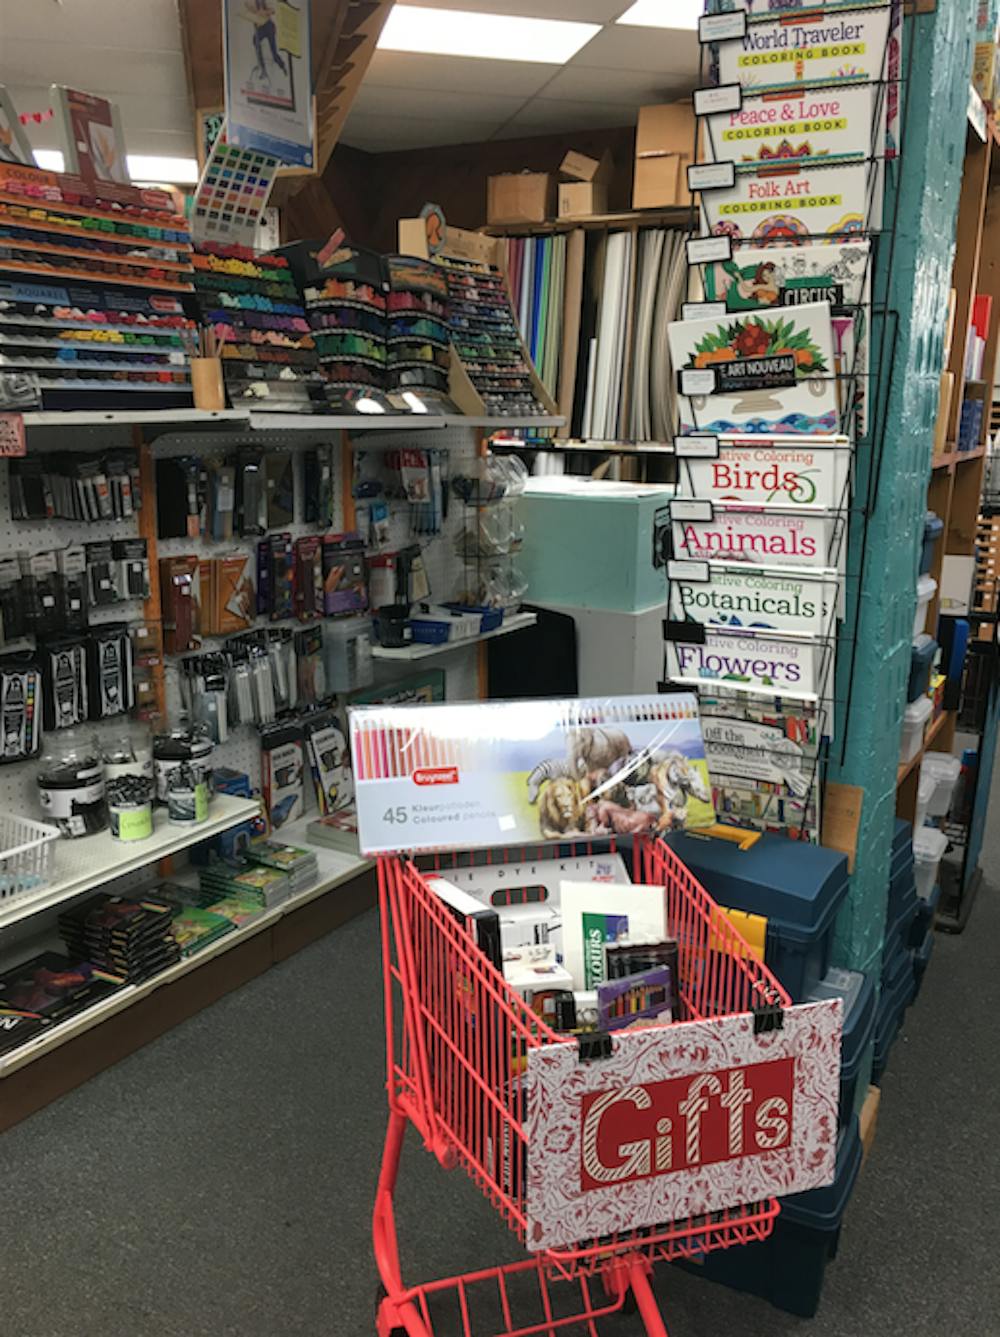 <p>Art Mart, located in the Village, is an art supply store that's been around since the 1940s or 50s. The store has had several names throughout the years, including Gordy's Art Mart.&nbsp;<i style="font-size: 14px;">Michelle Kaufman // DN</i></p>